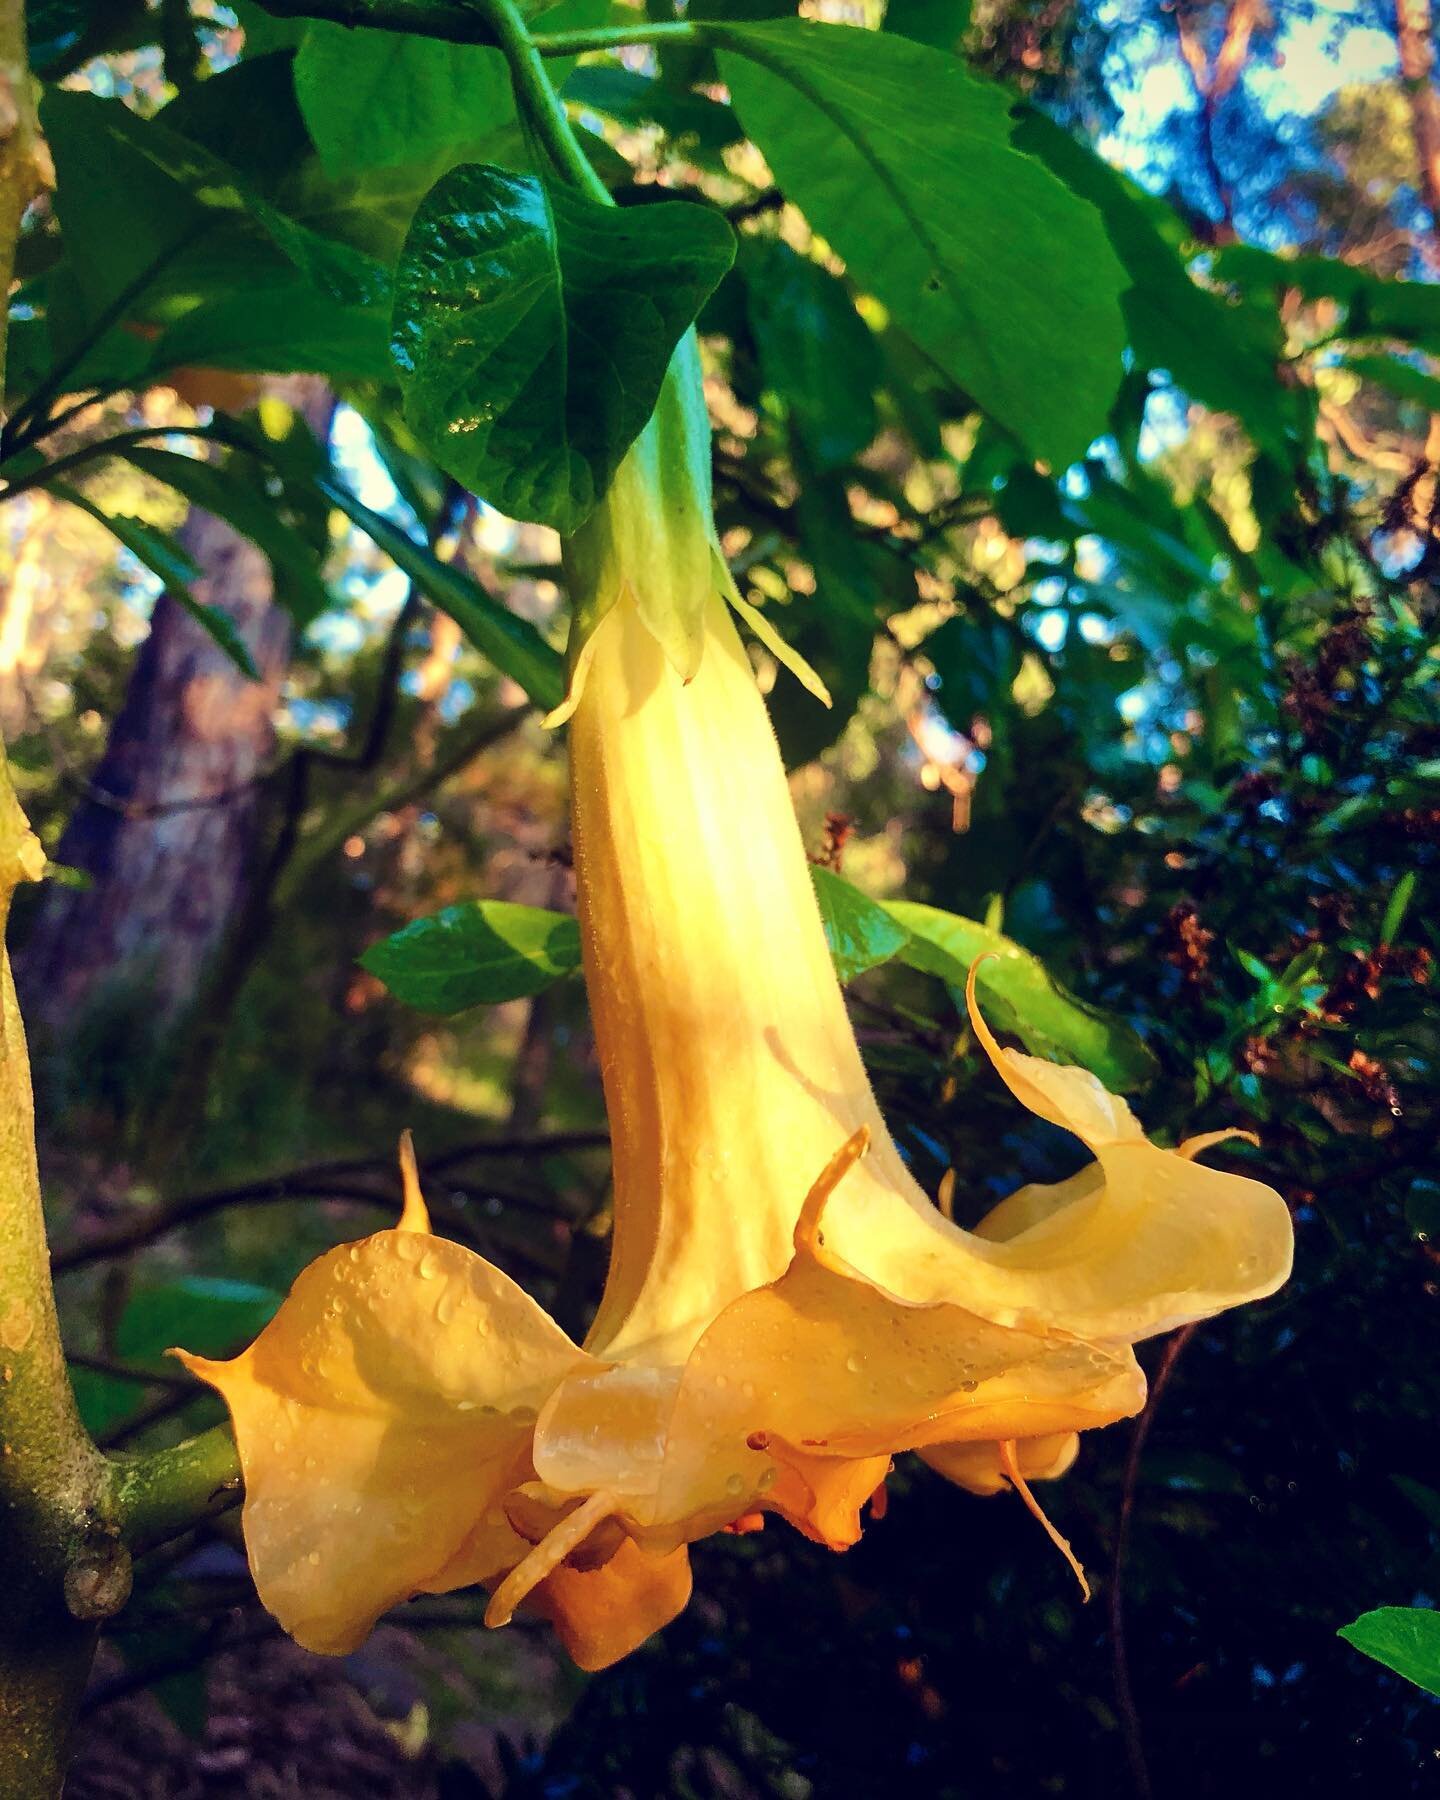 We found this nice double yellows brugmansia in the garden today 🌸